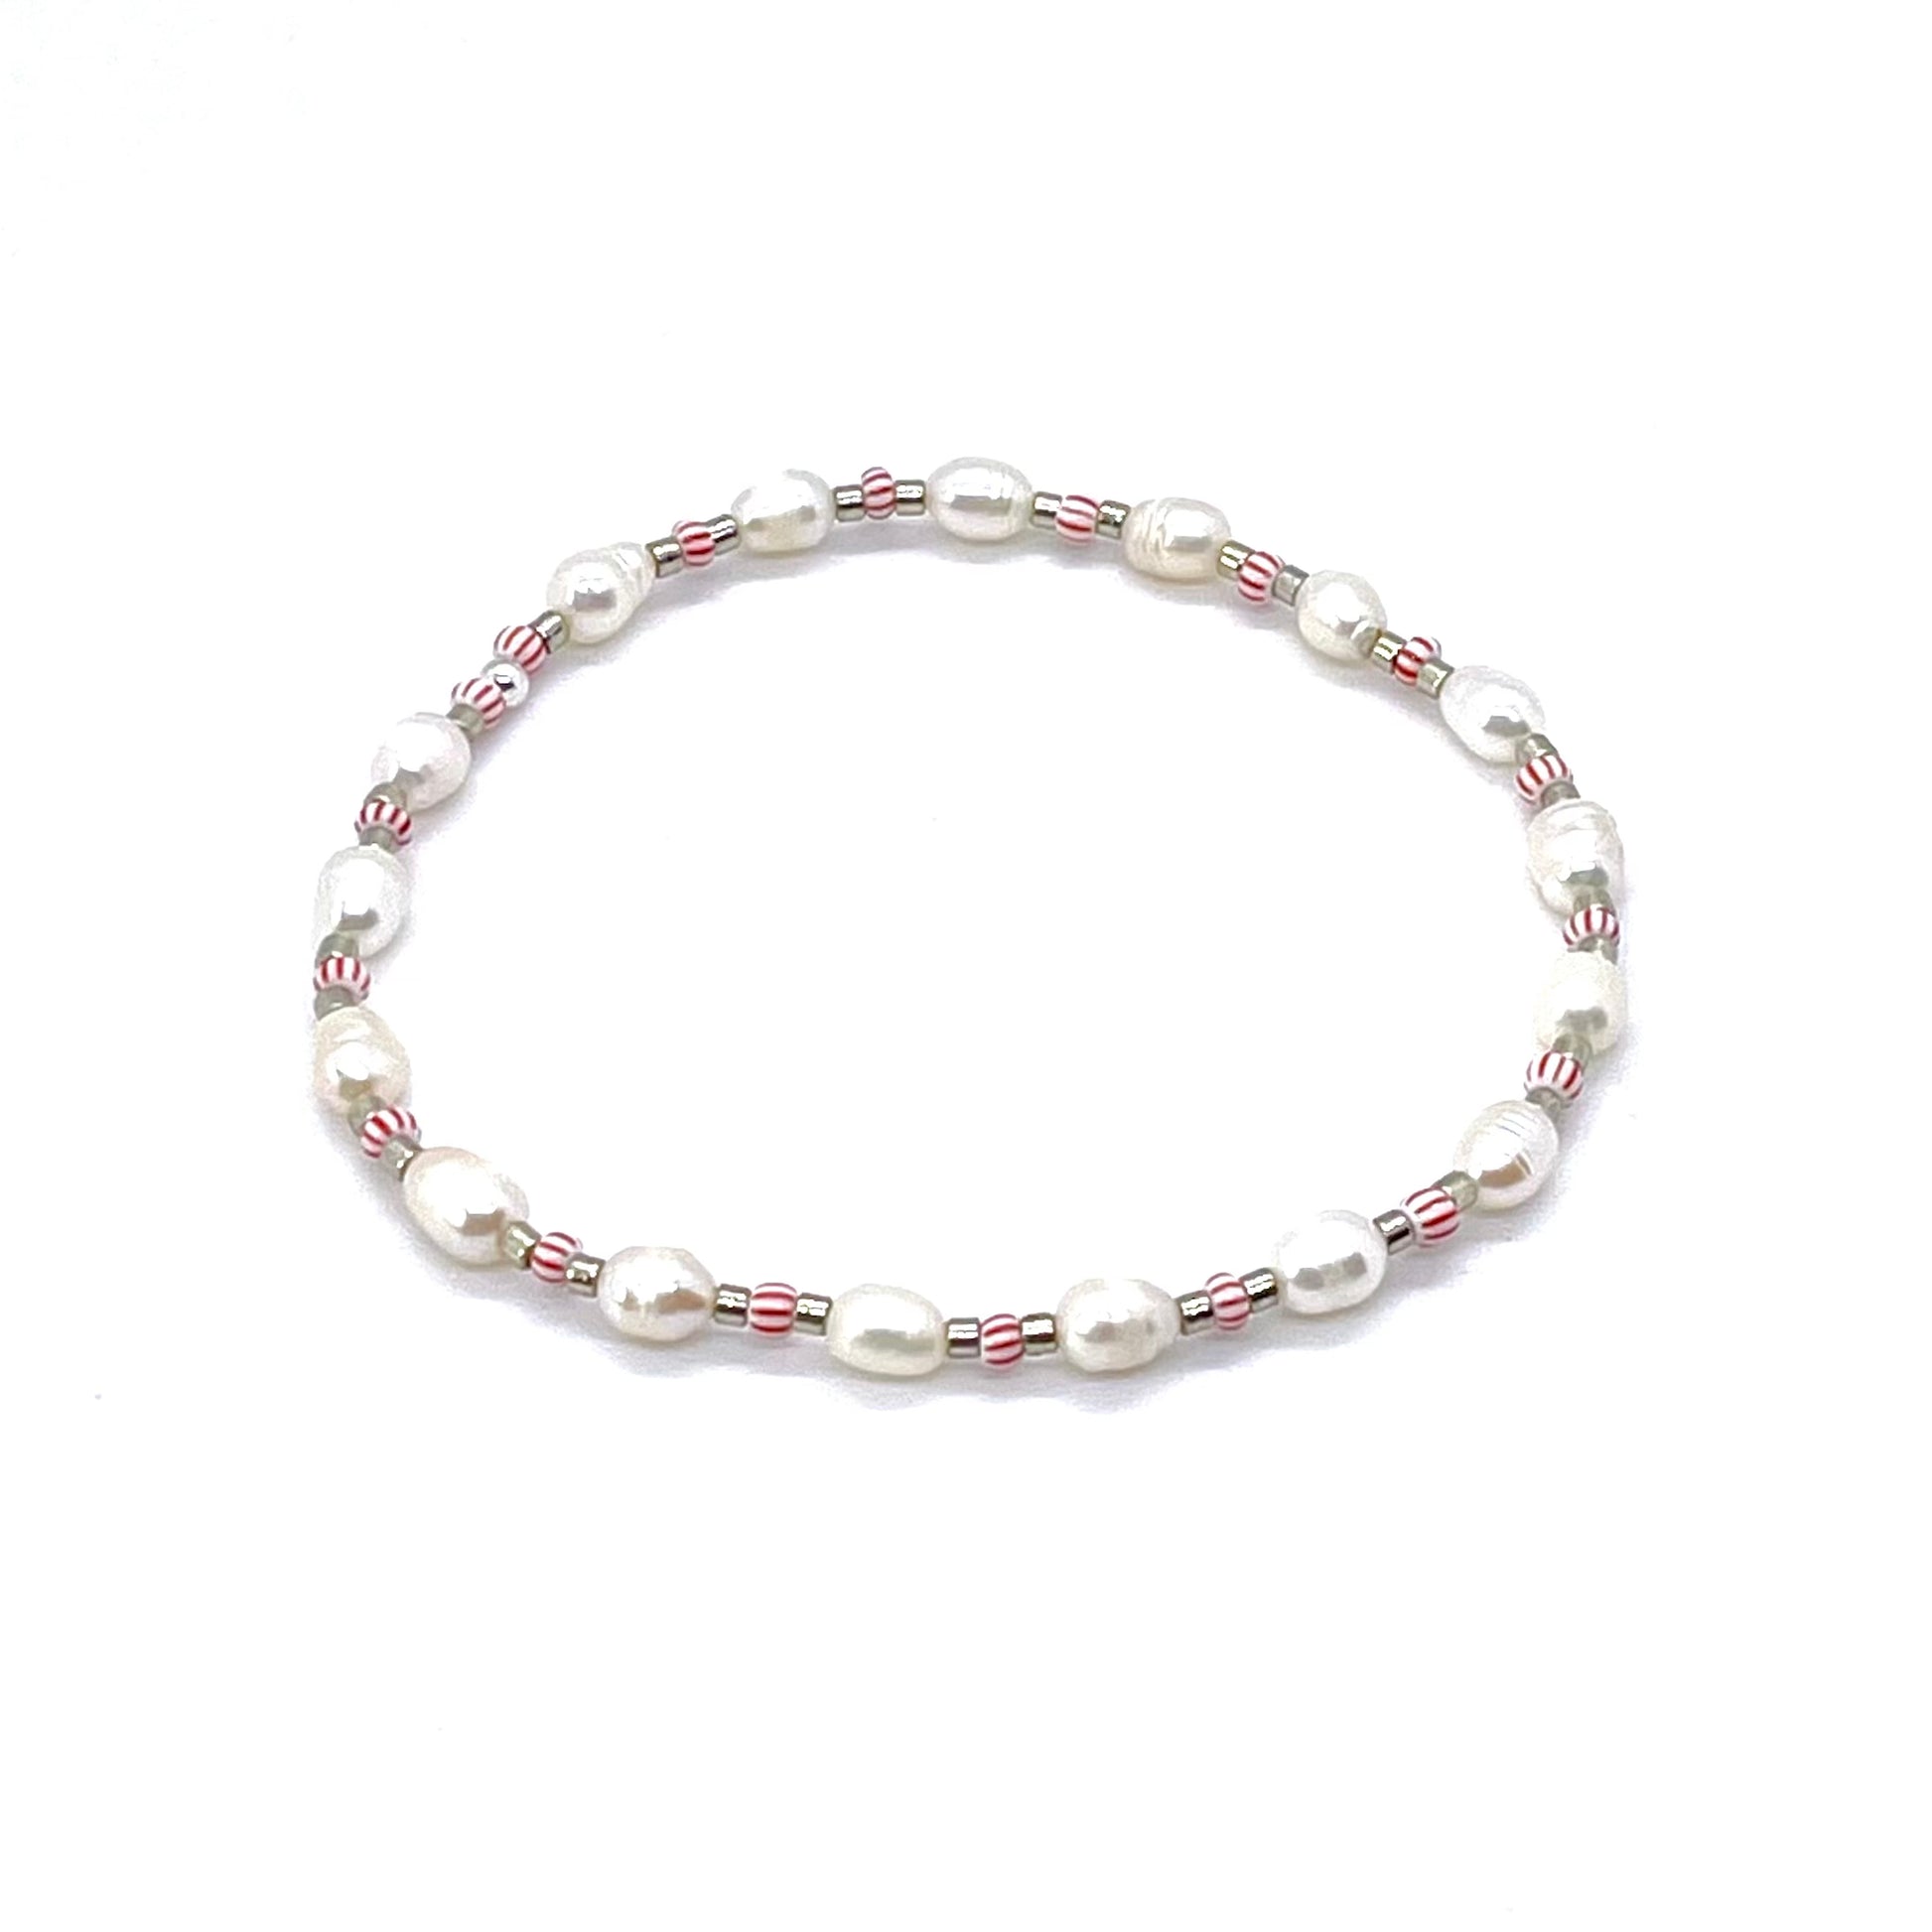 Pearl anklet with silver tone and red & white striped seed beads on elastic stretch cord.